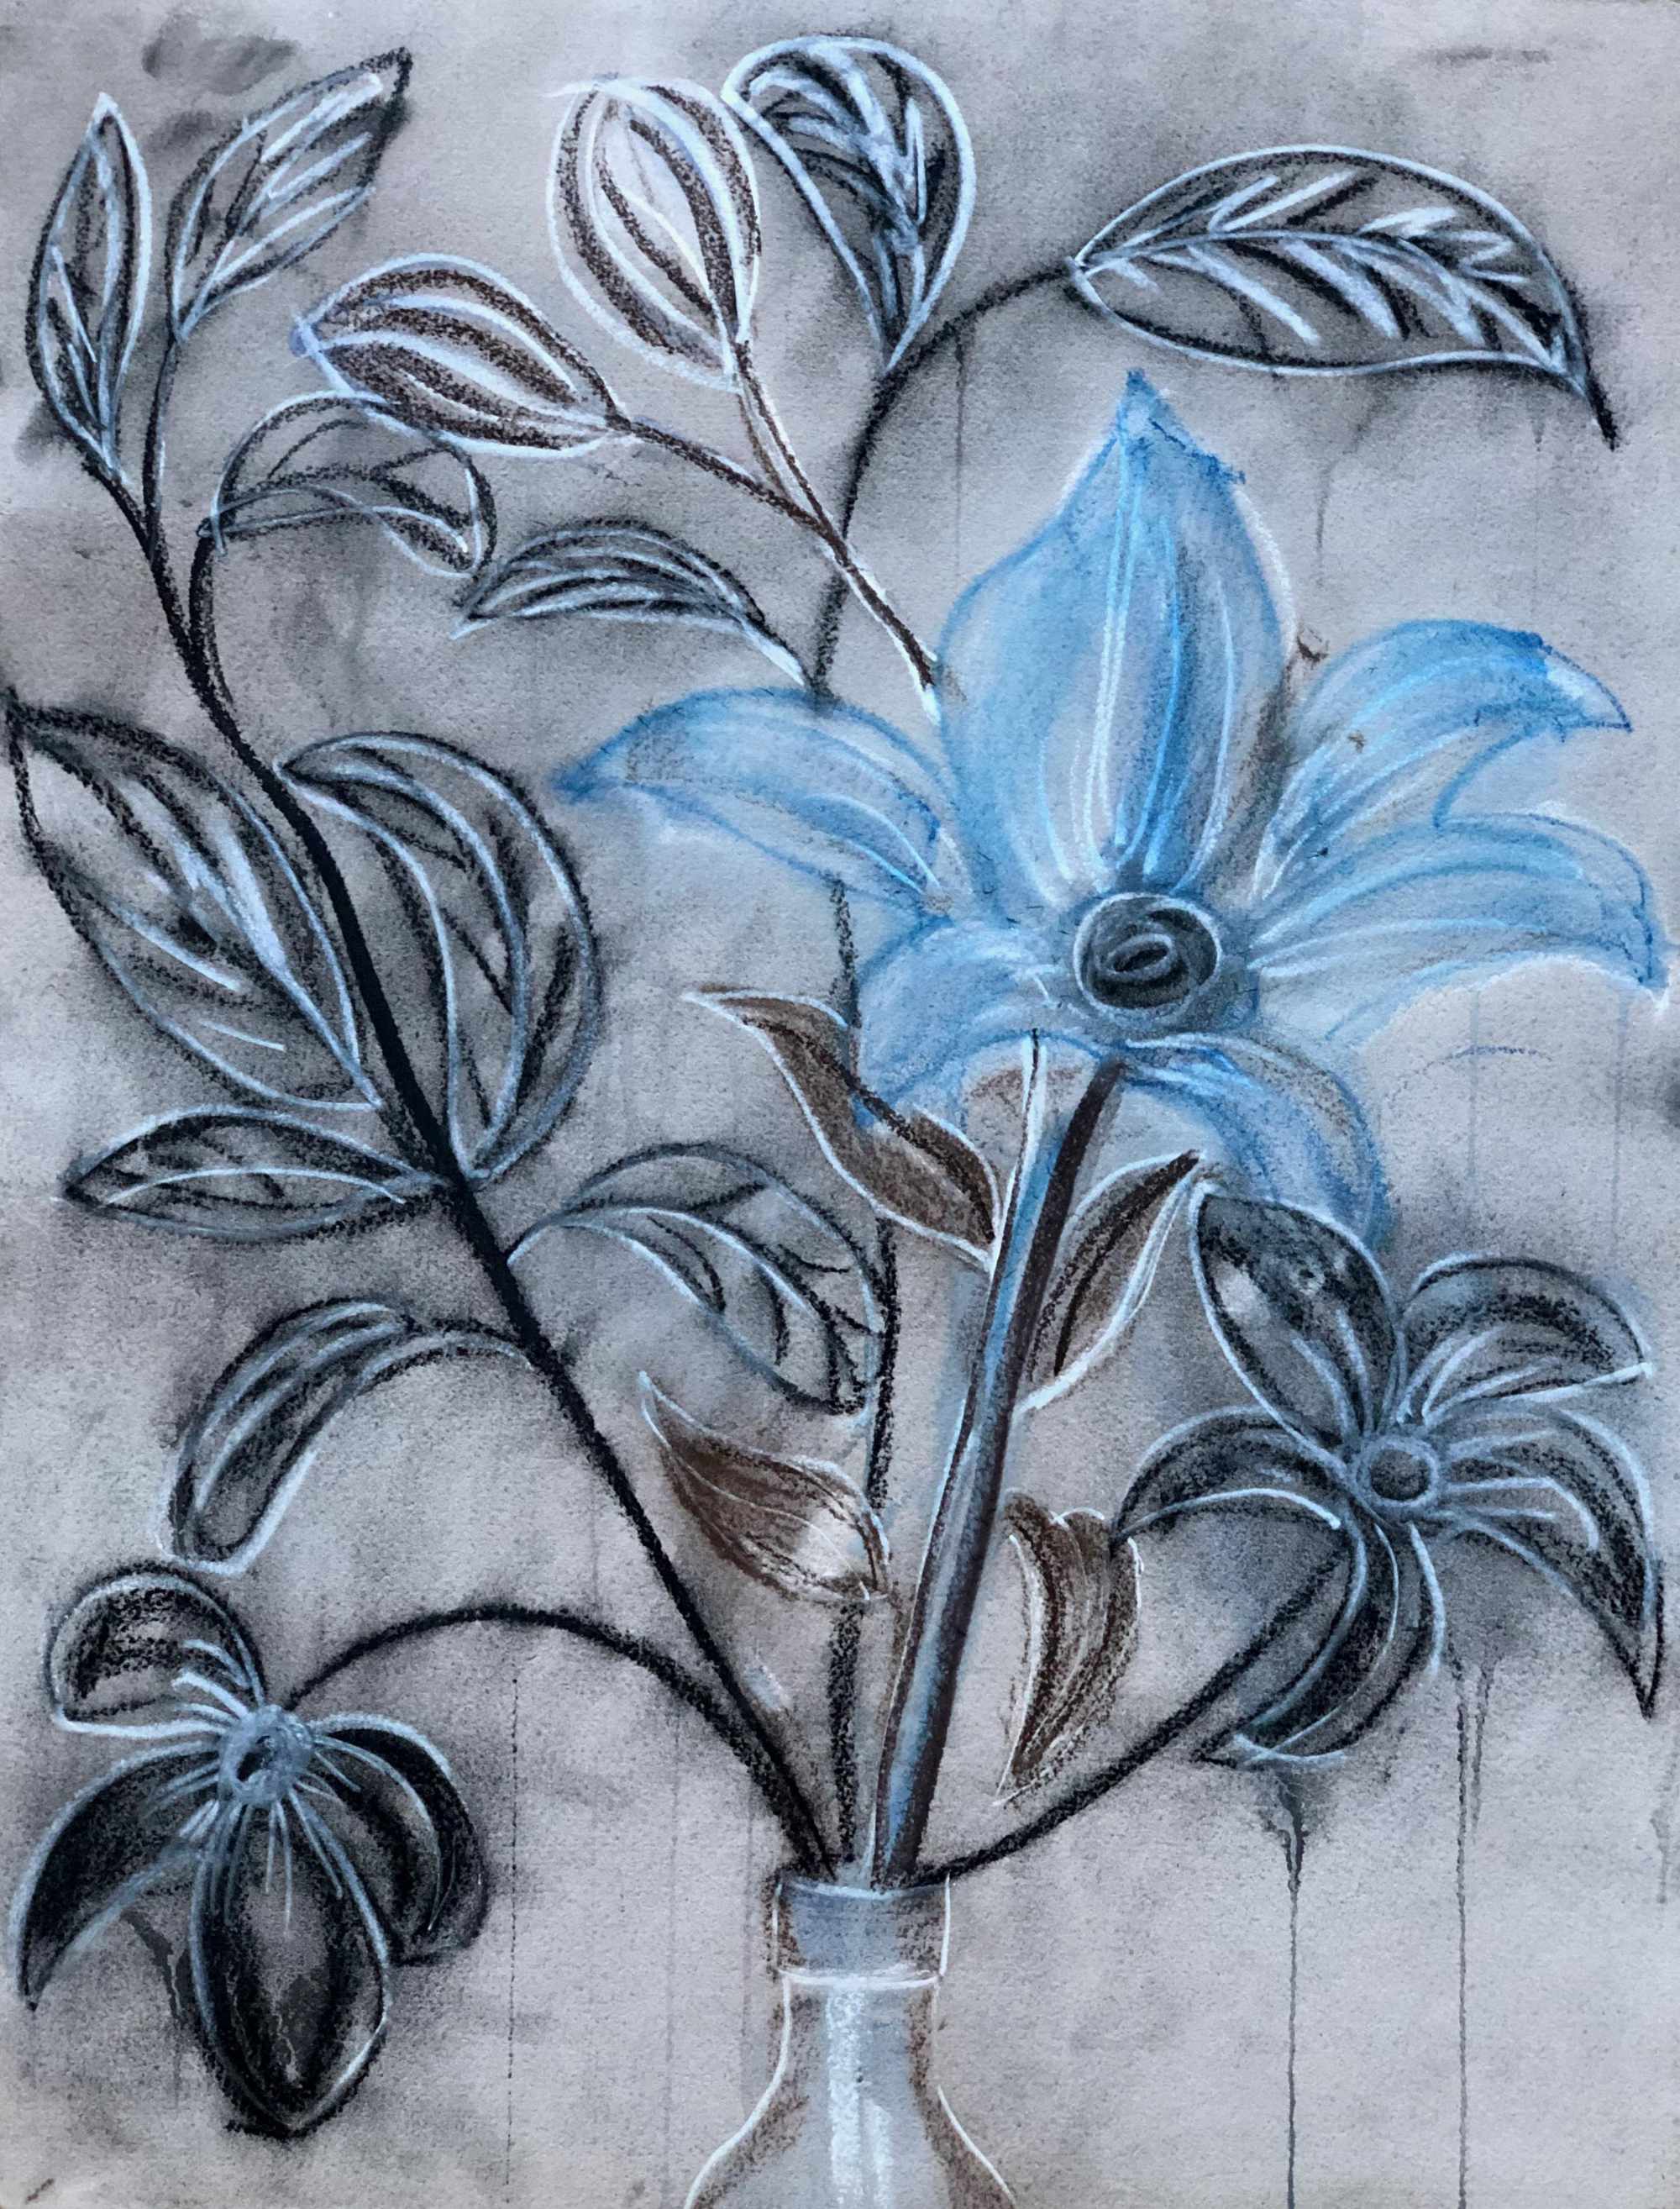 Still Life With Blue Flower - Charcoal & Pastel on Arches - 420 x 600mm